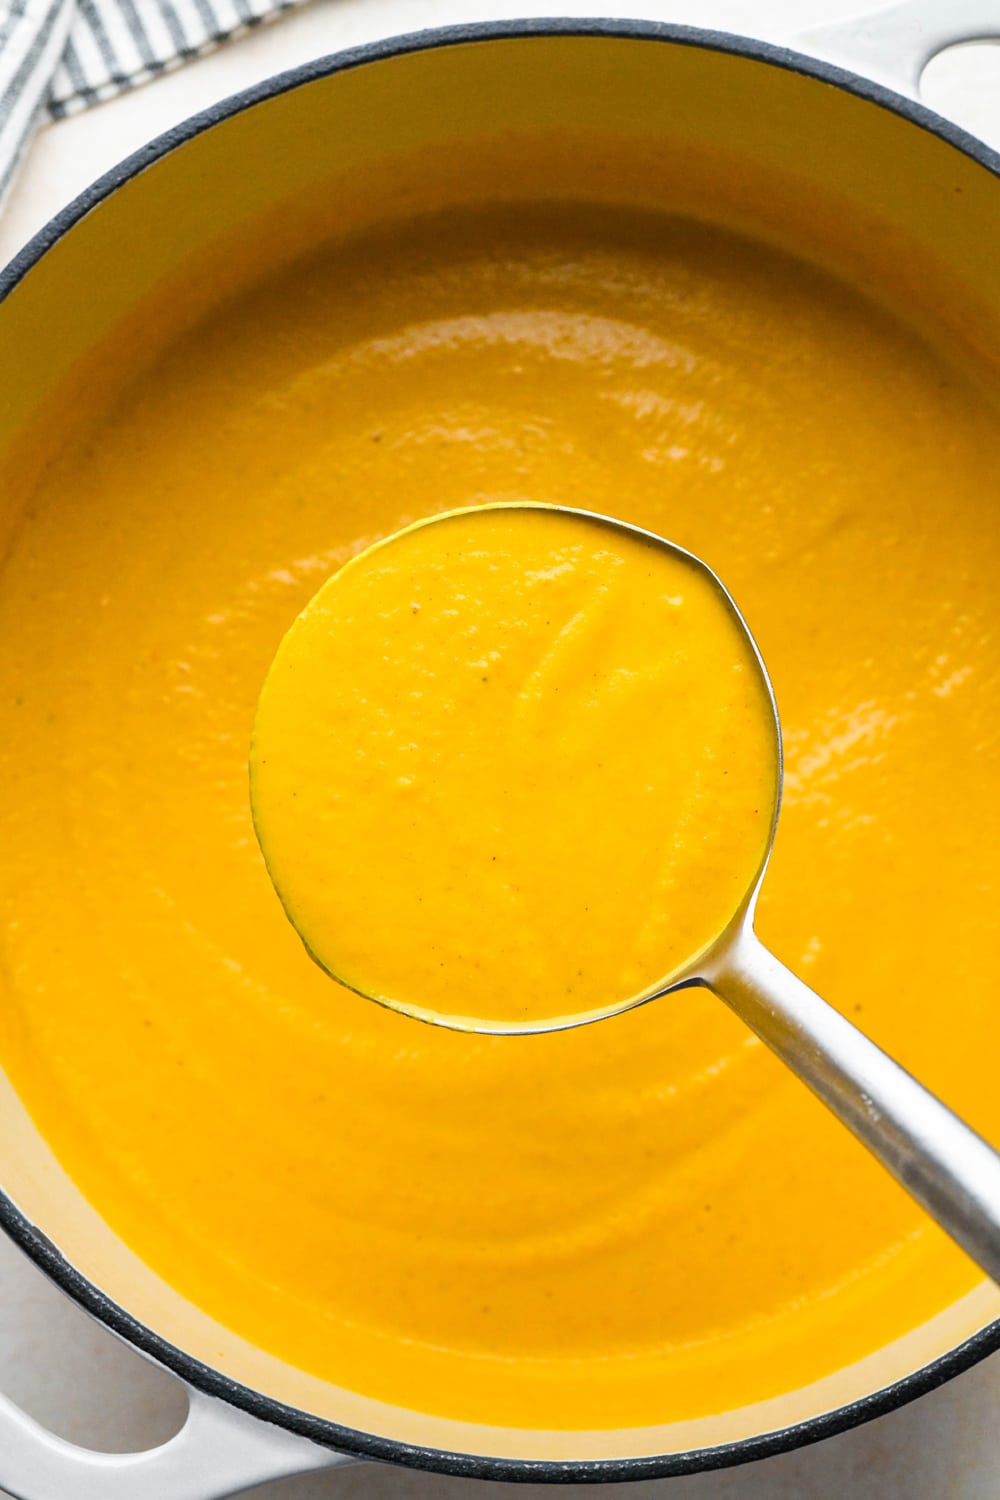 How to make Dairy Free Pumpkin Carrot Soup: A ladle lifting out a portion of the blended soup from soup pot.